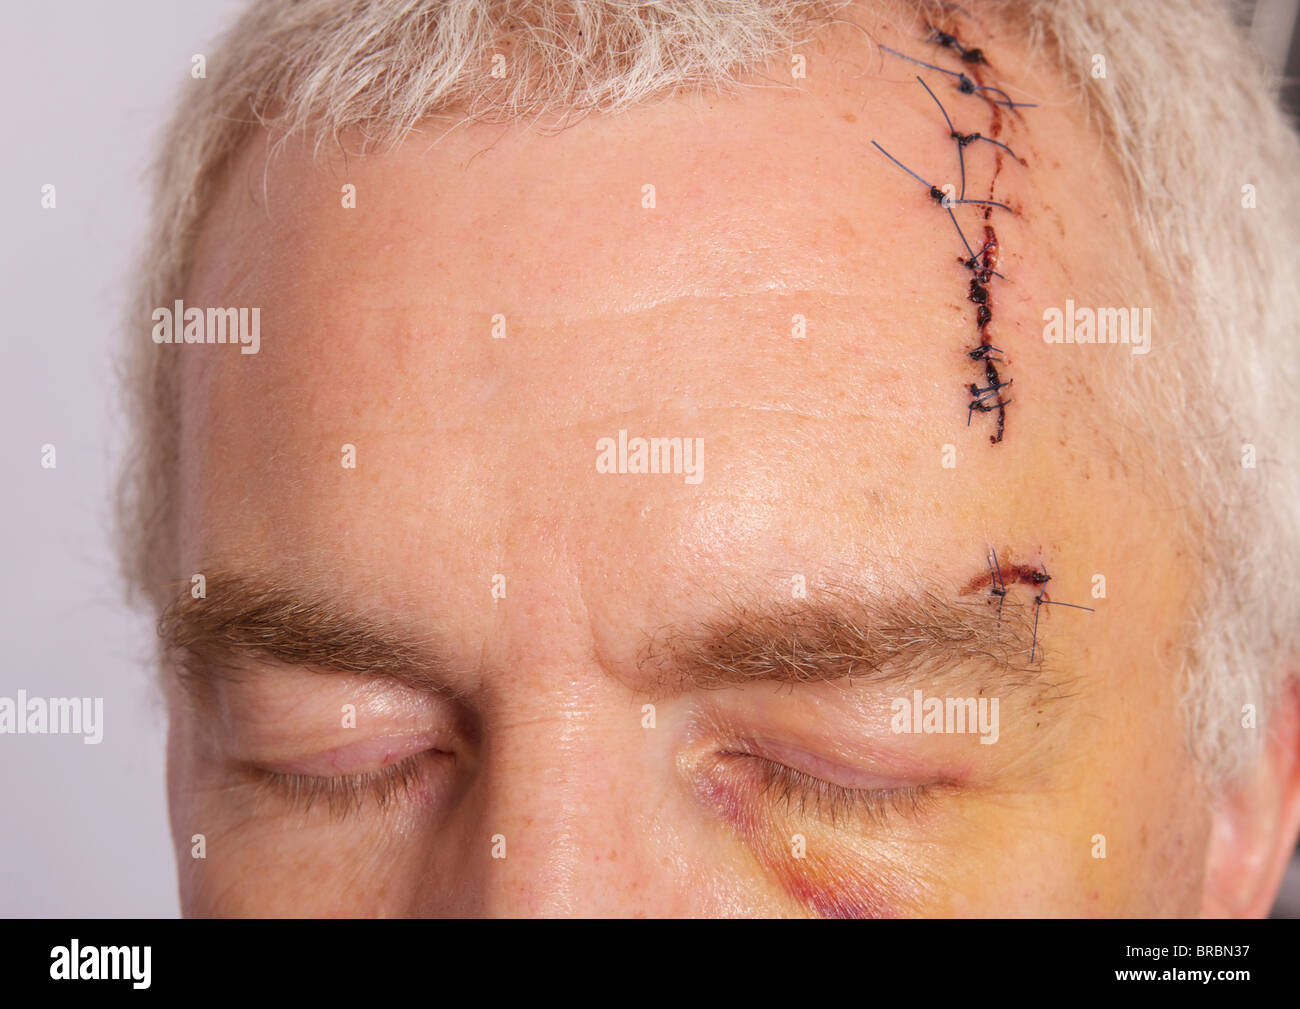 Man with long head wound and stitches Stock Photo